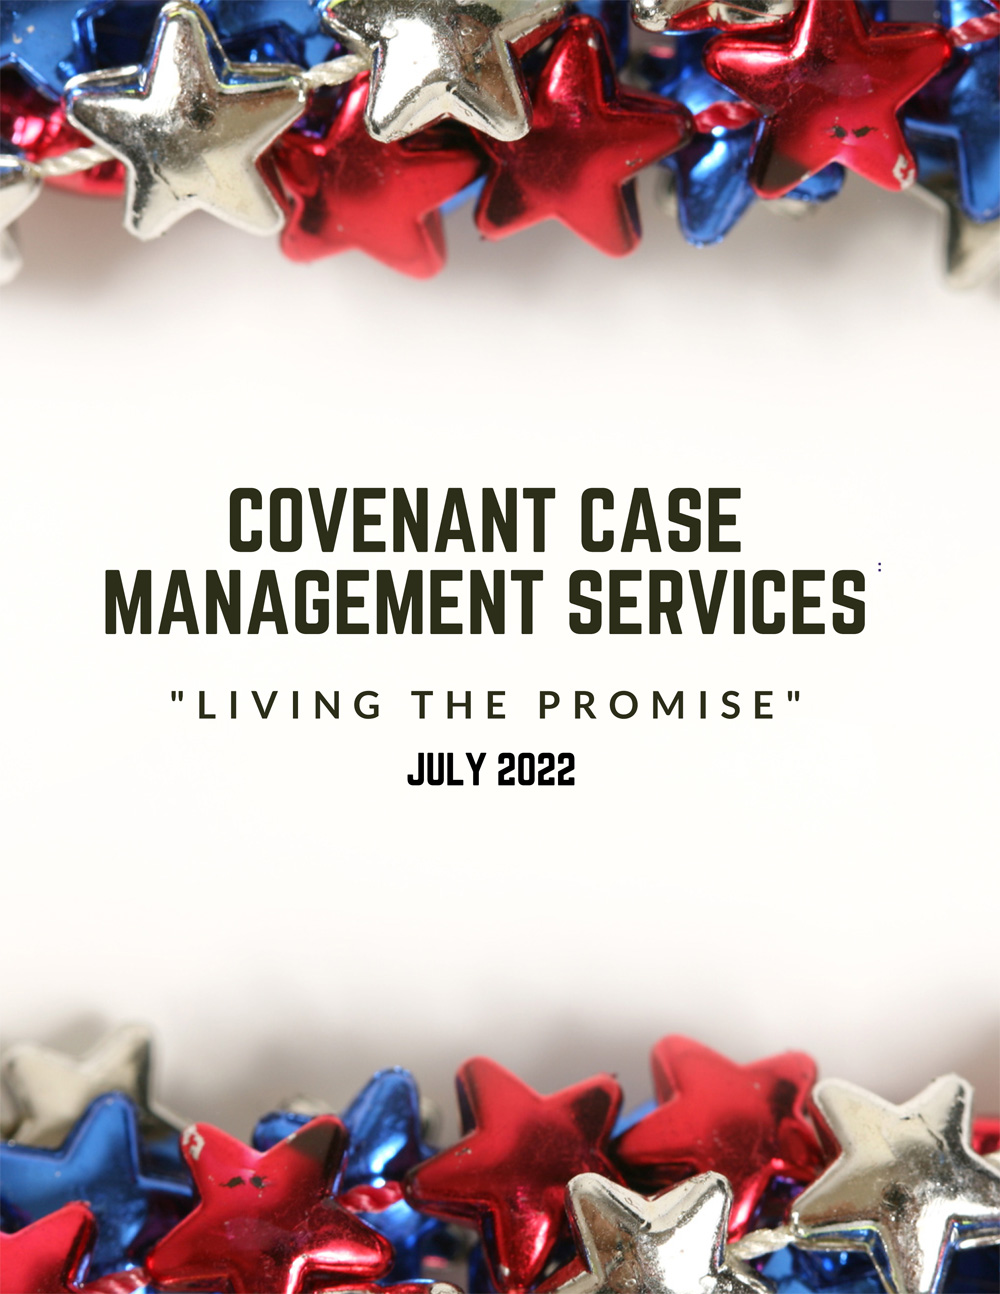 July 2022 Newsletter from Covenant Case Management Services